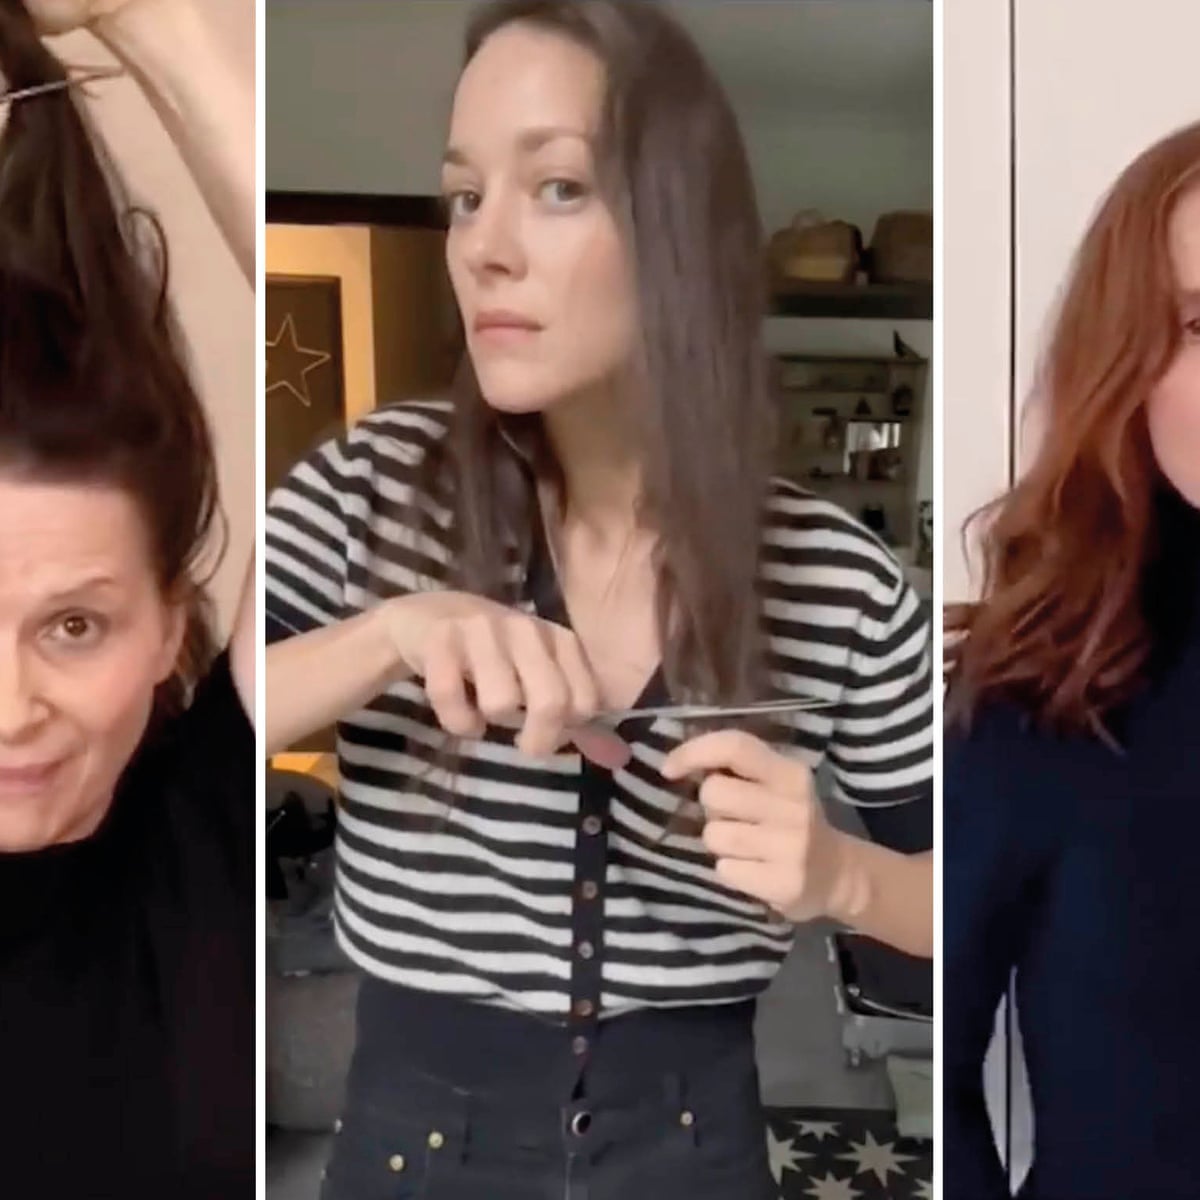 For freedom': French actors cut their hair in support of Iranian women |  France | The Guardian